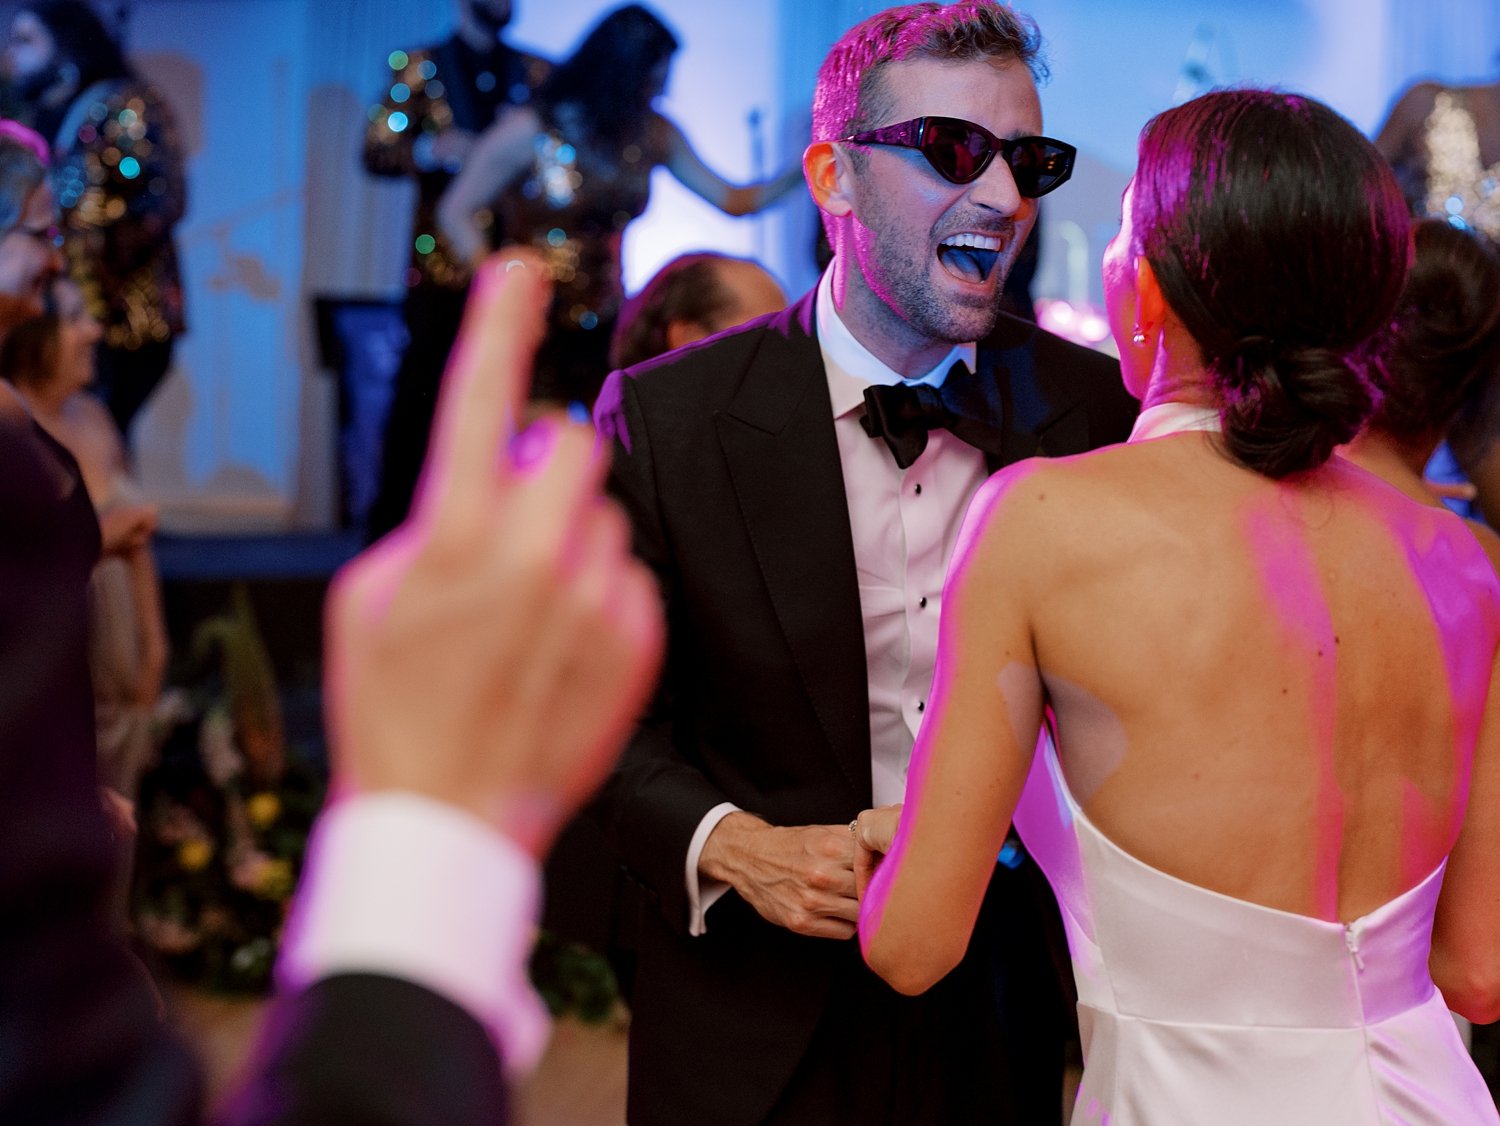 bride and groom sing dancing to live band at New England wedding reception 